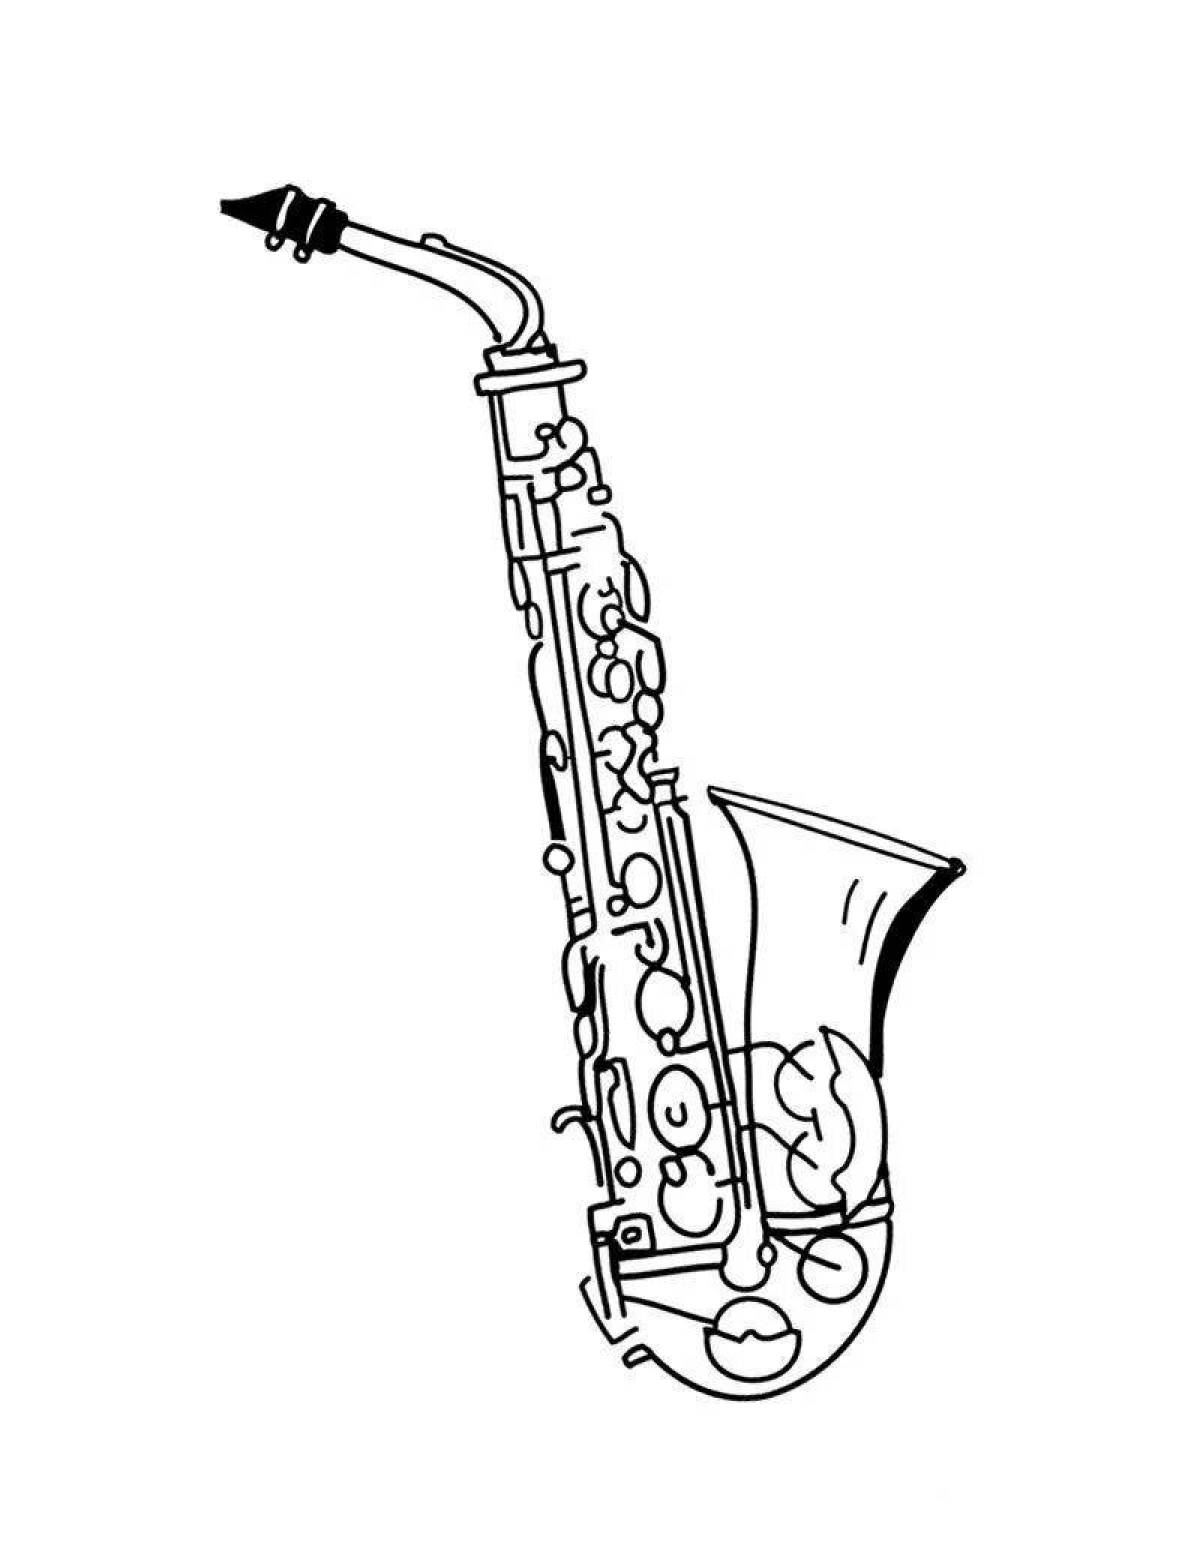 Coloring page playful saxophone